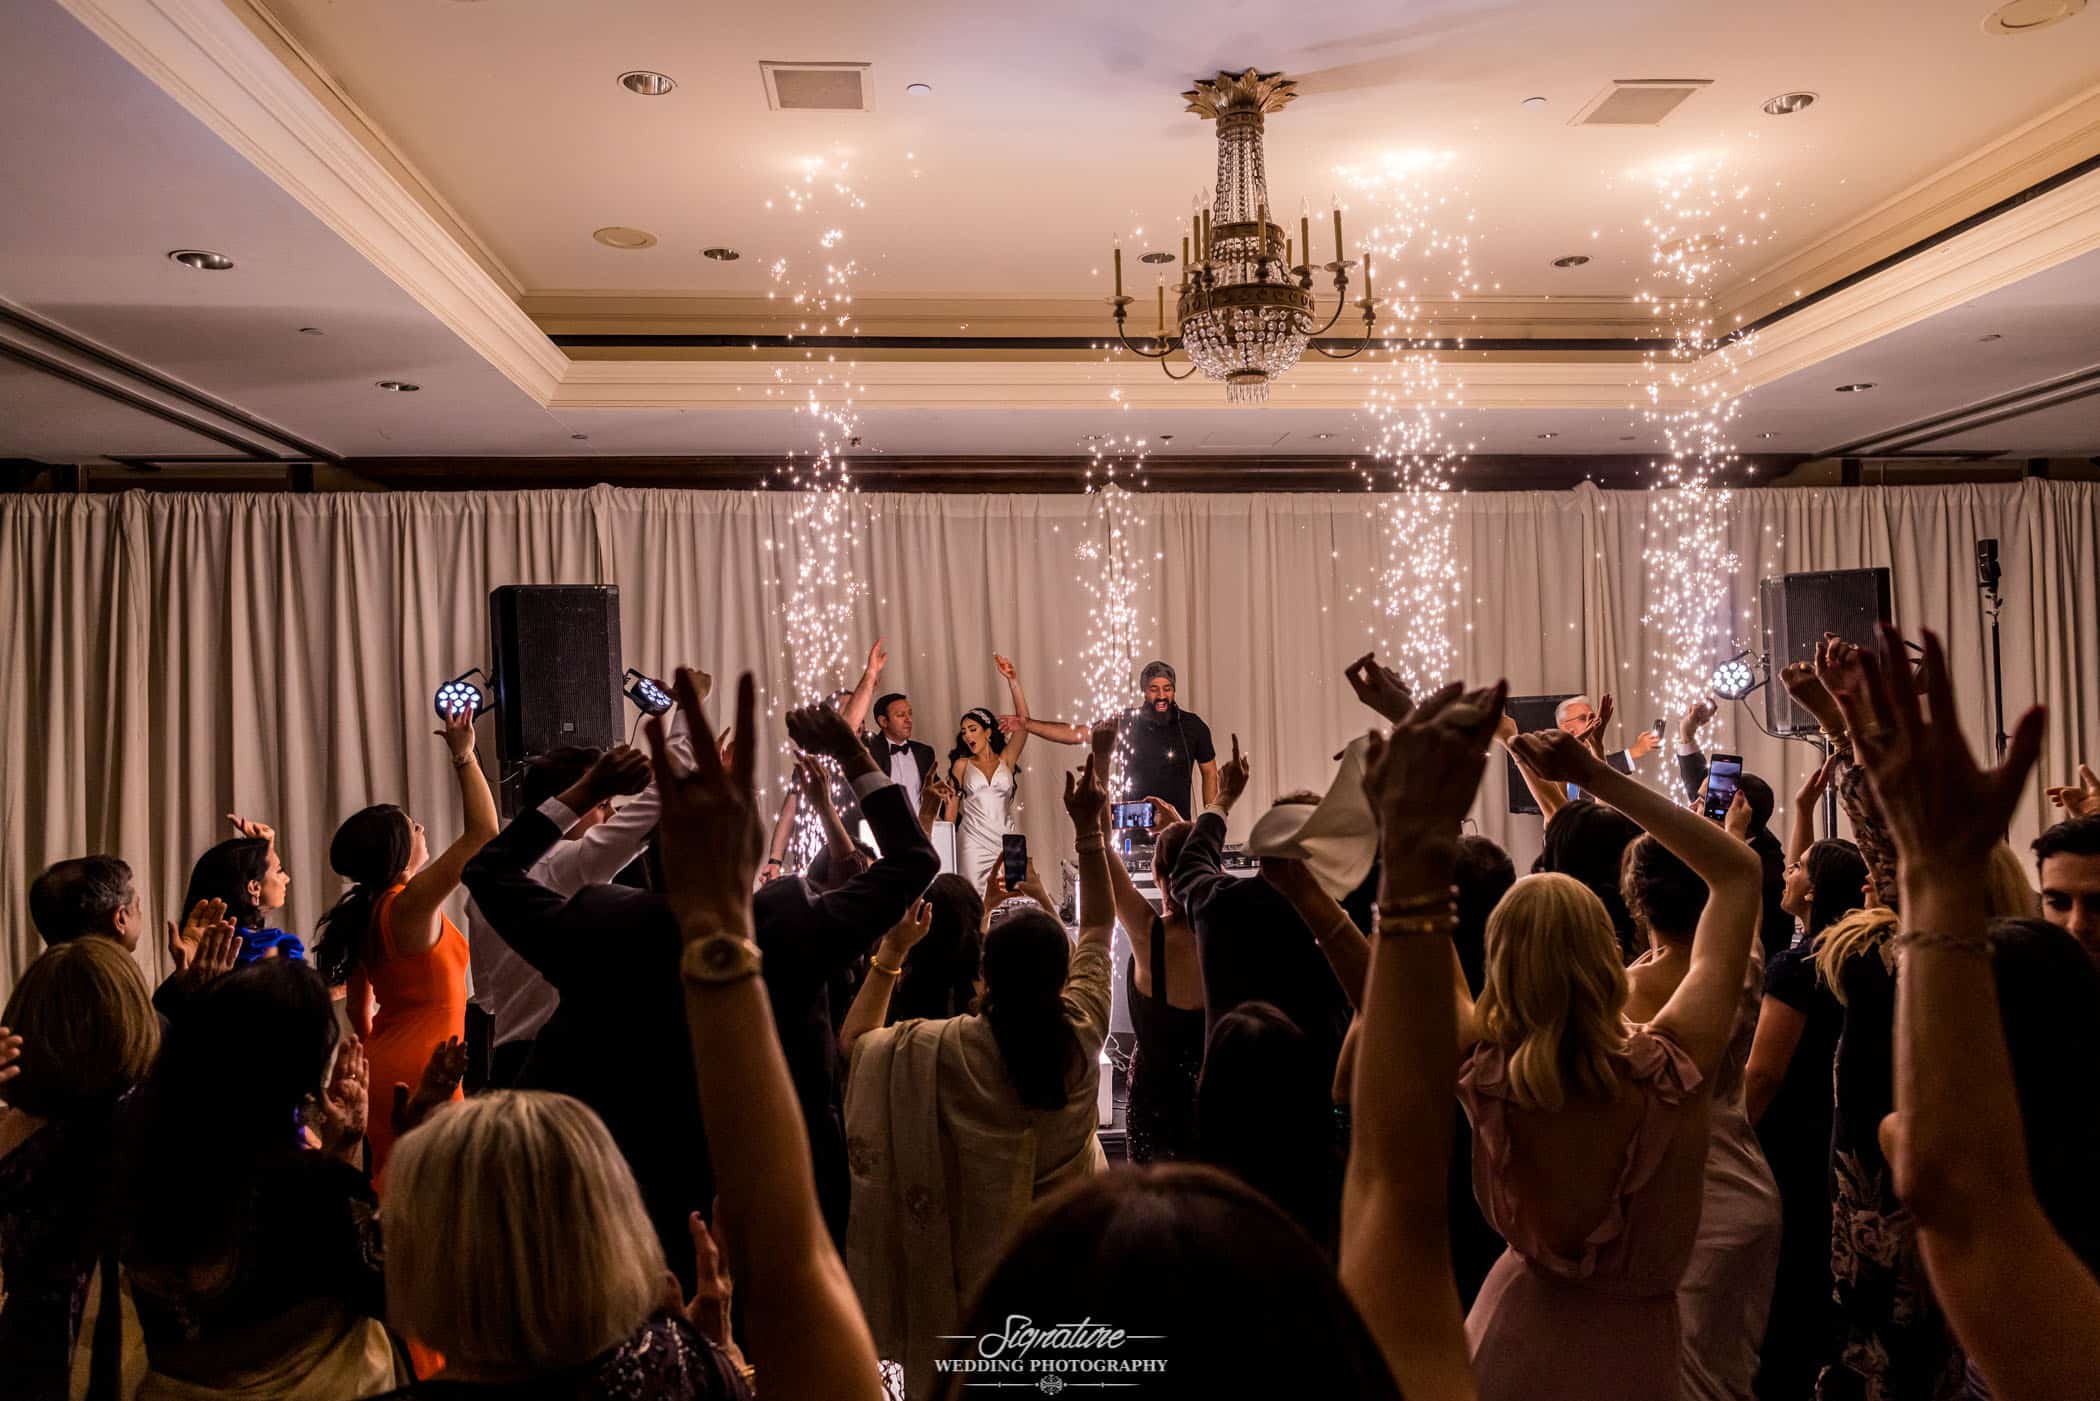 Wedding guests dancing while sparks fly